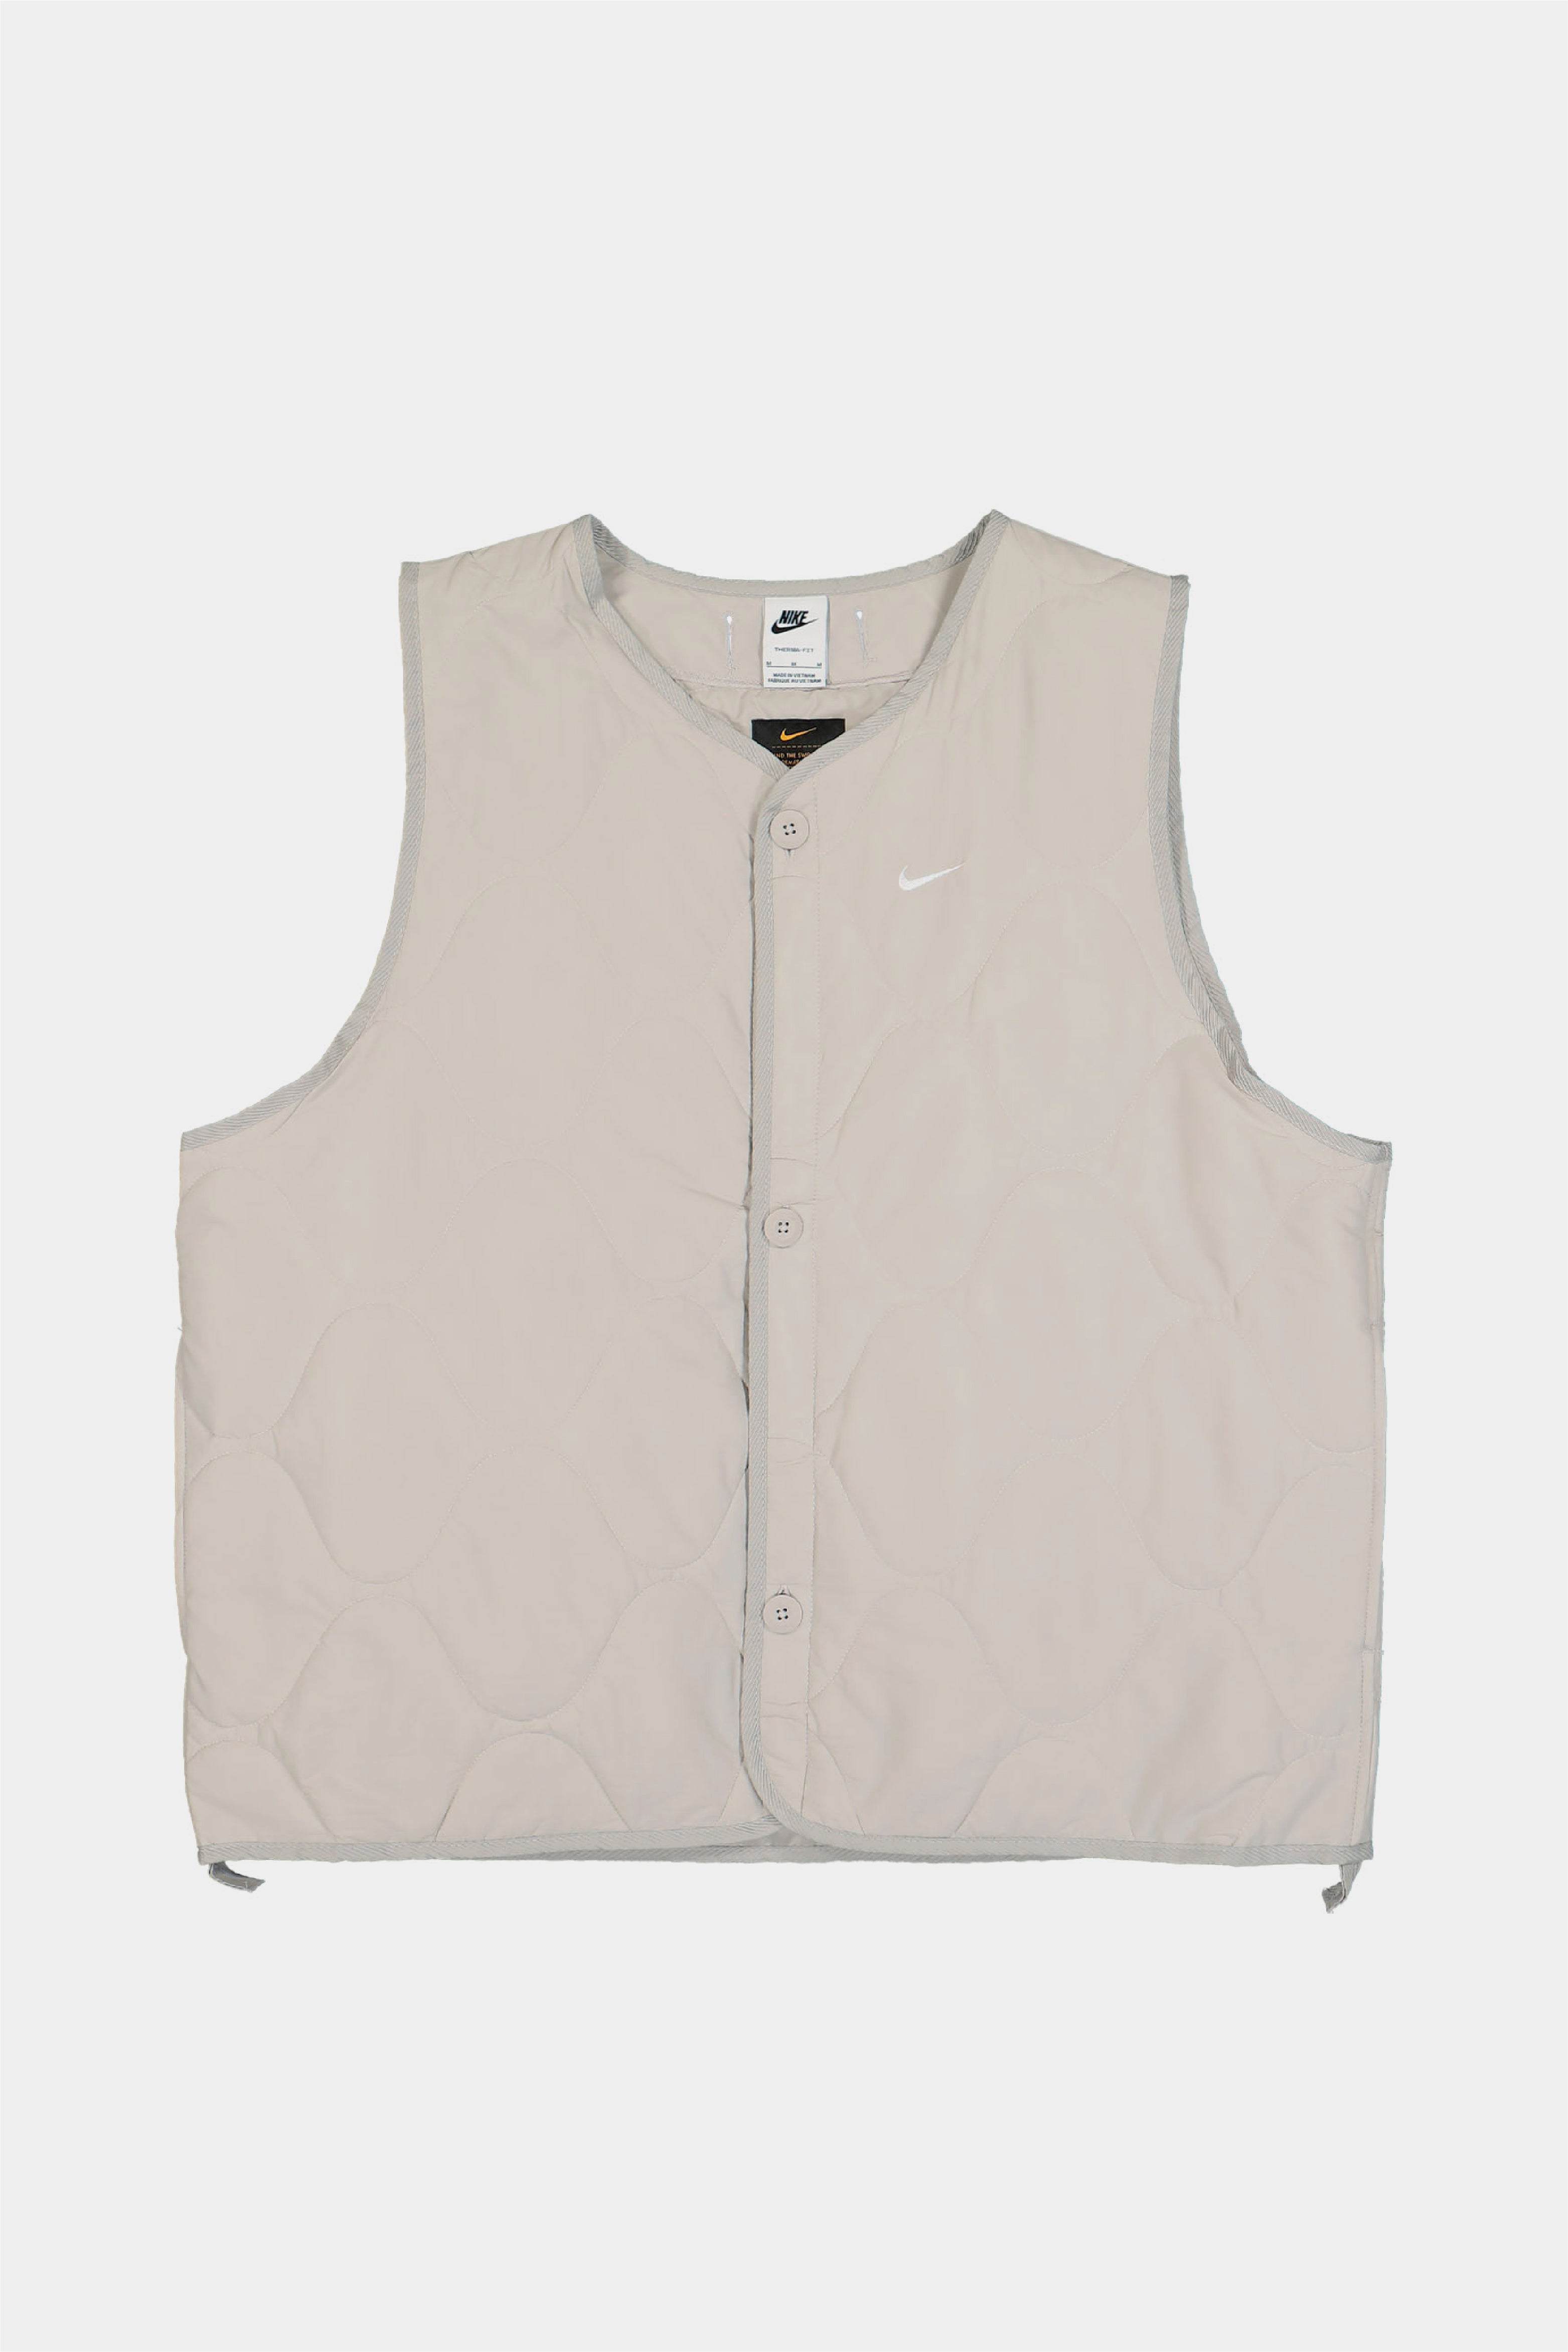 Selectshop FRAME - NIKE SB Woven Insulated Military Vest Outerwear Concept Store Dubai